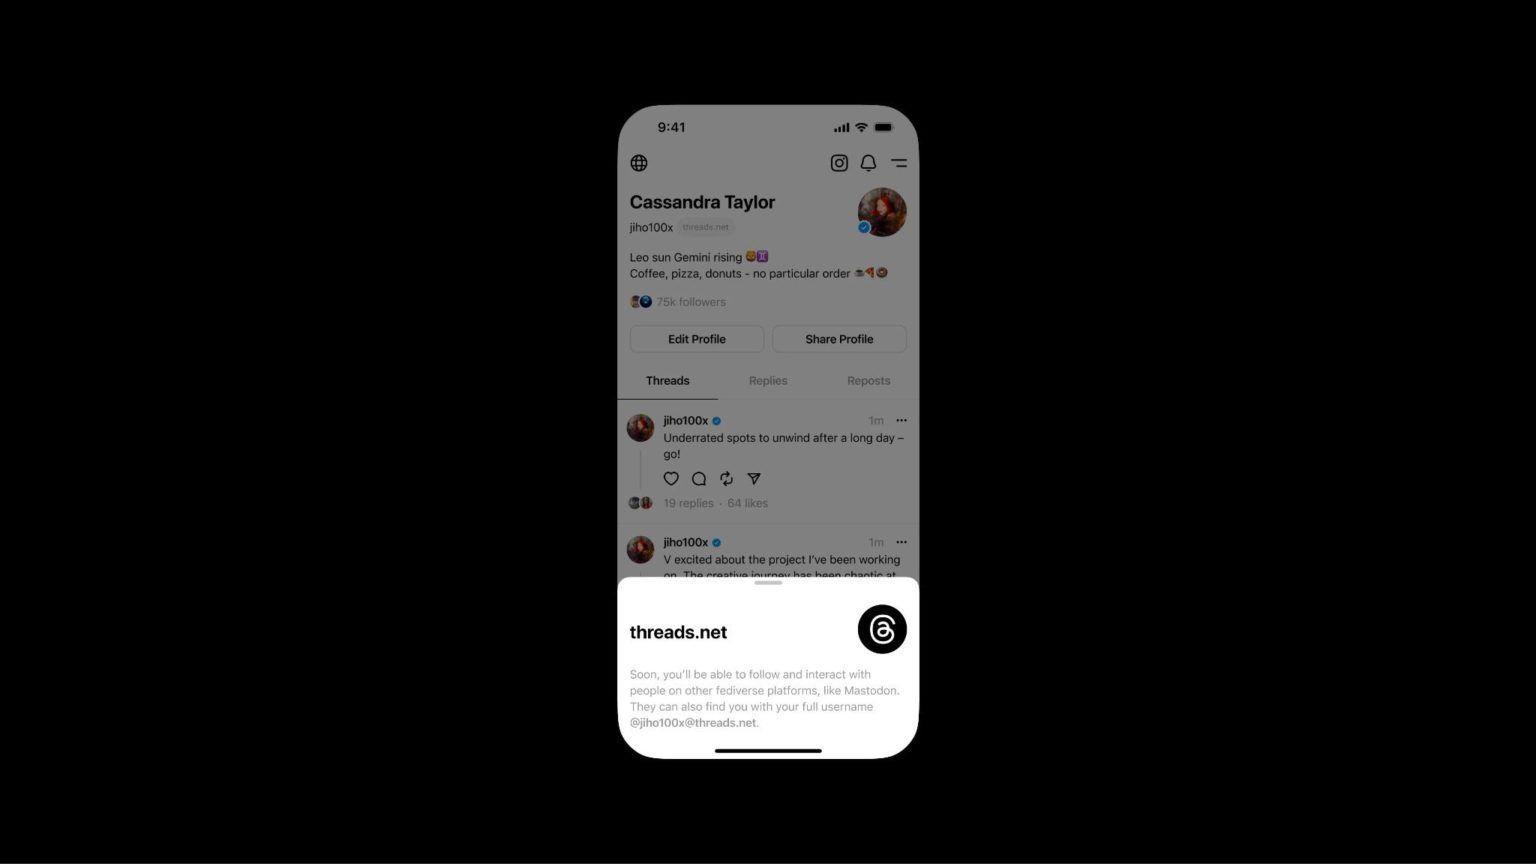 Threads posts will be available from other apps as well